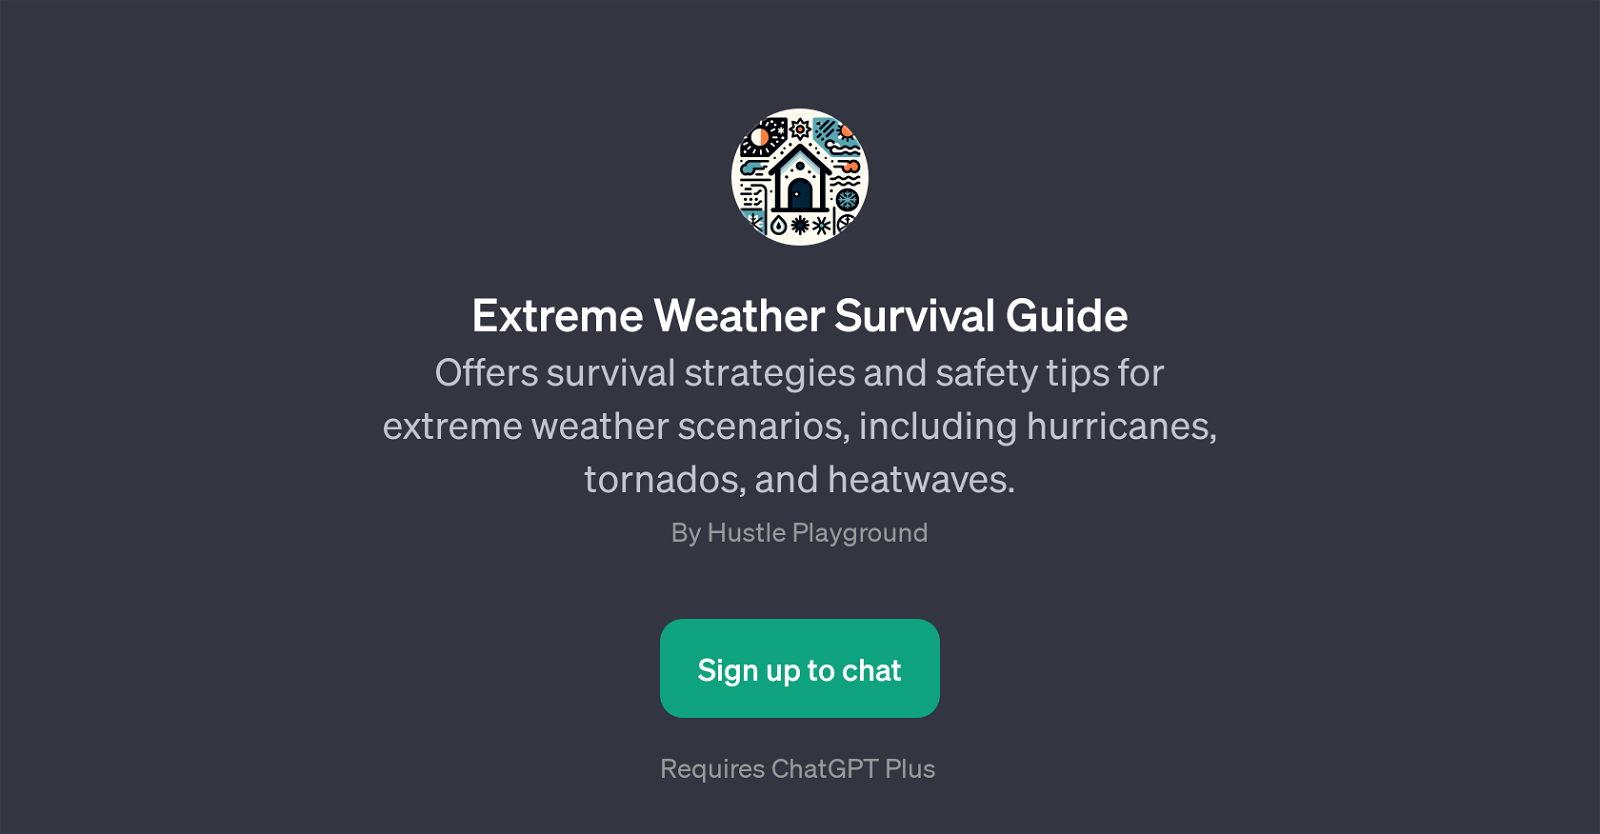 Extreme Weather Survival Guide website